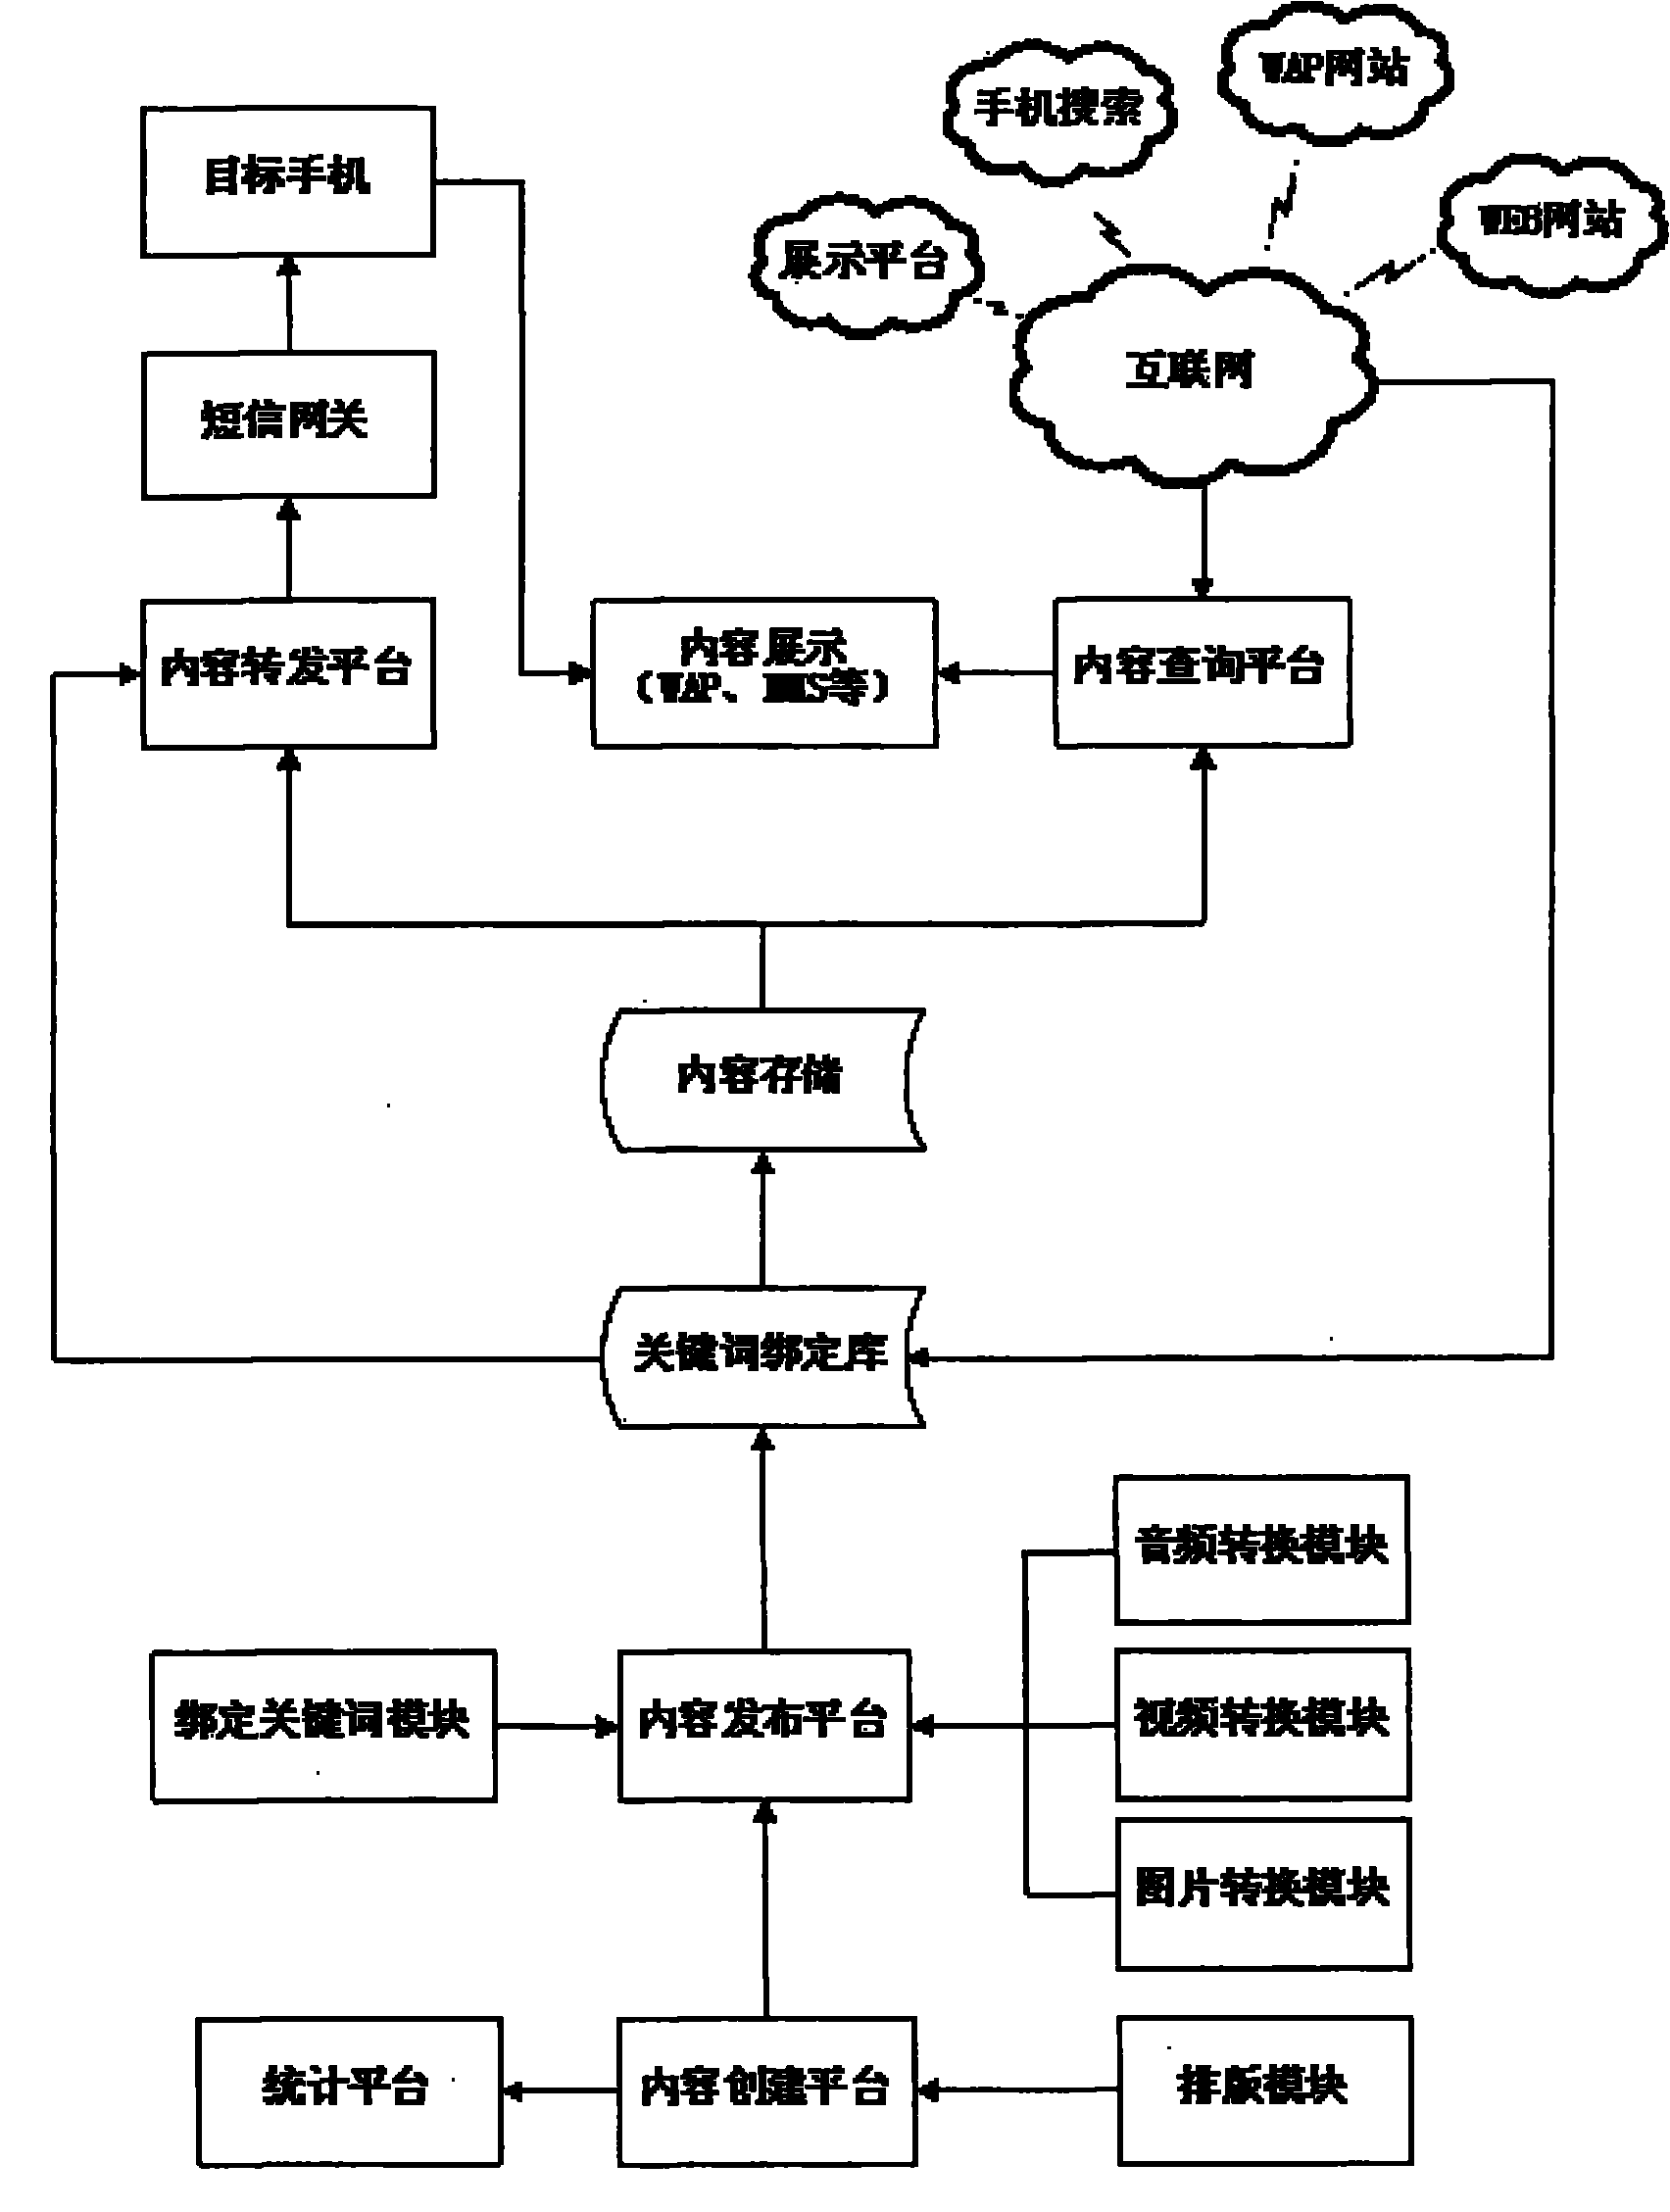 Method for producing and distributing contents of wireless multimedia system